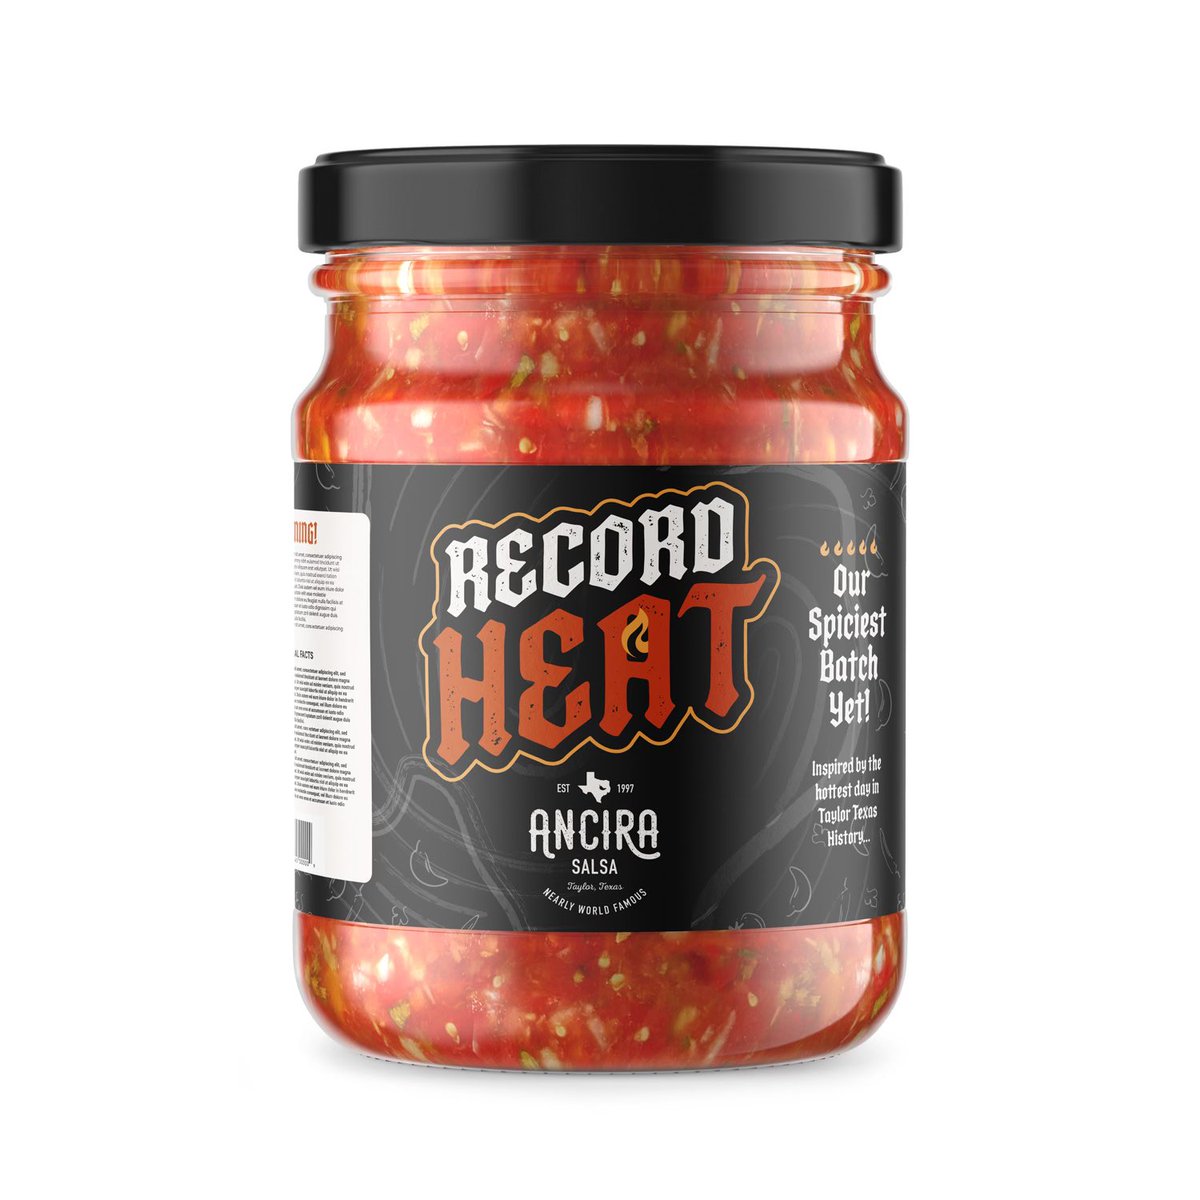 Coming soon. Ancira’s “Record Heat” Salsa! 
Inspired by the hottest day in Taylor, TX history! 
☀️🥵🔥🌶️🫙
You asked for hotter, well there’s no turning back now. Get ready…
#ancirasalsa #RecordHeat